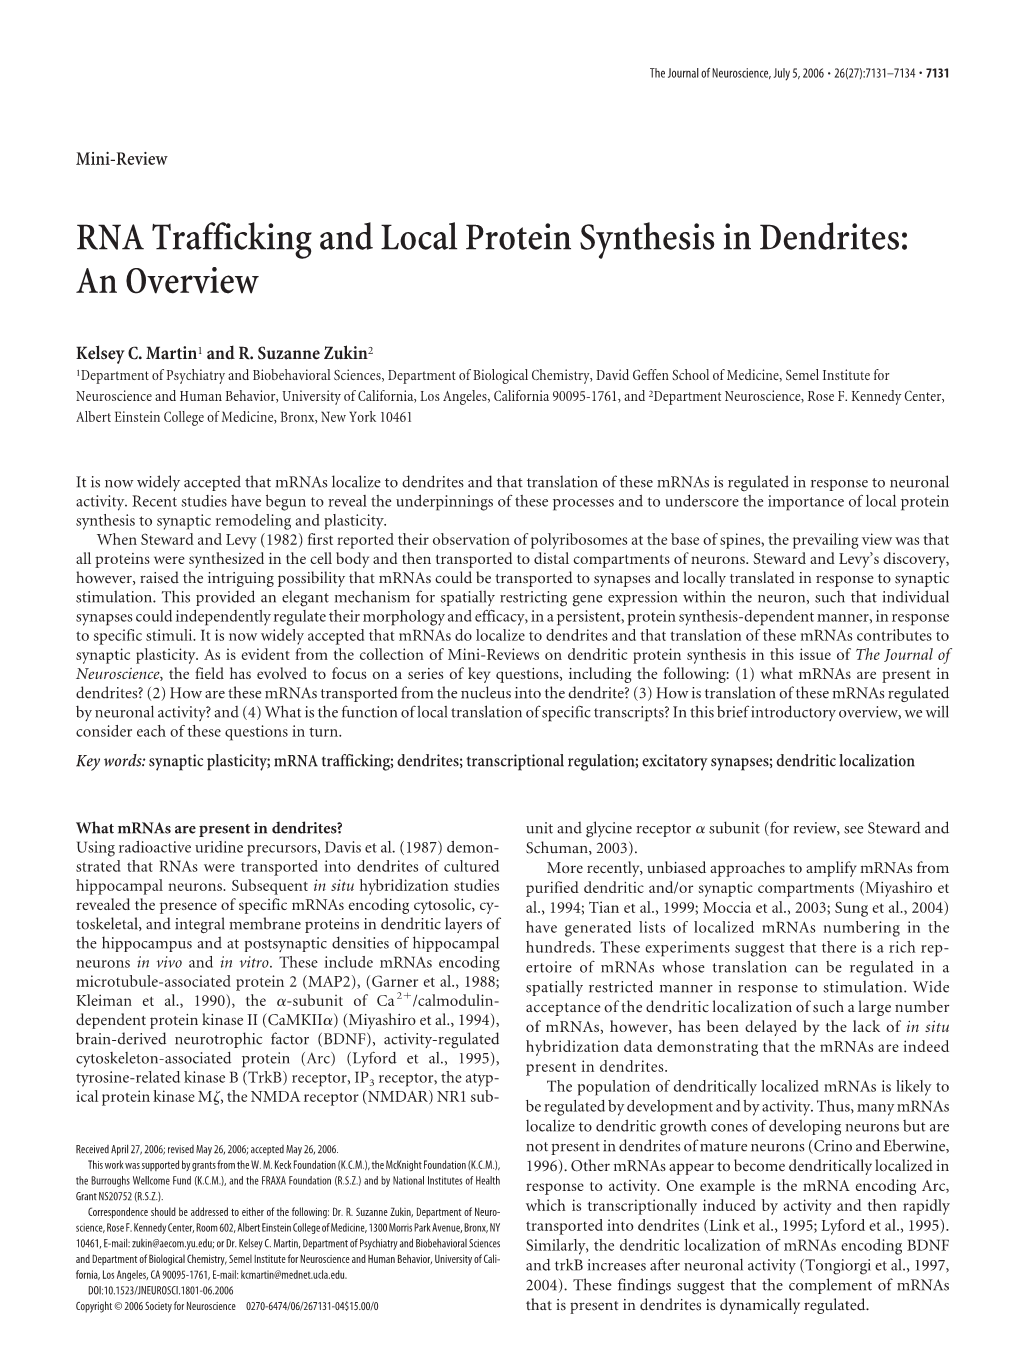 RNA Trafficking and Local Protein Synthesis in Dendrites: an Overview